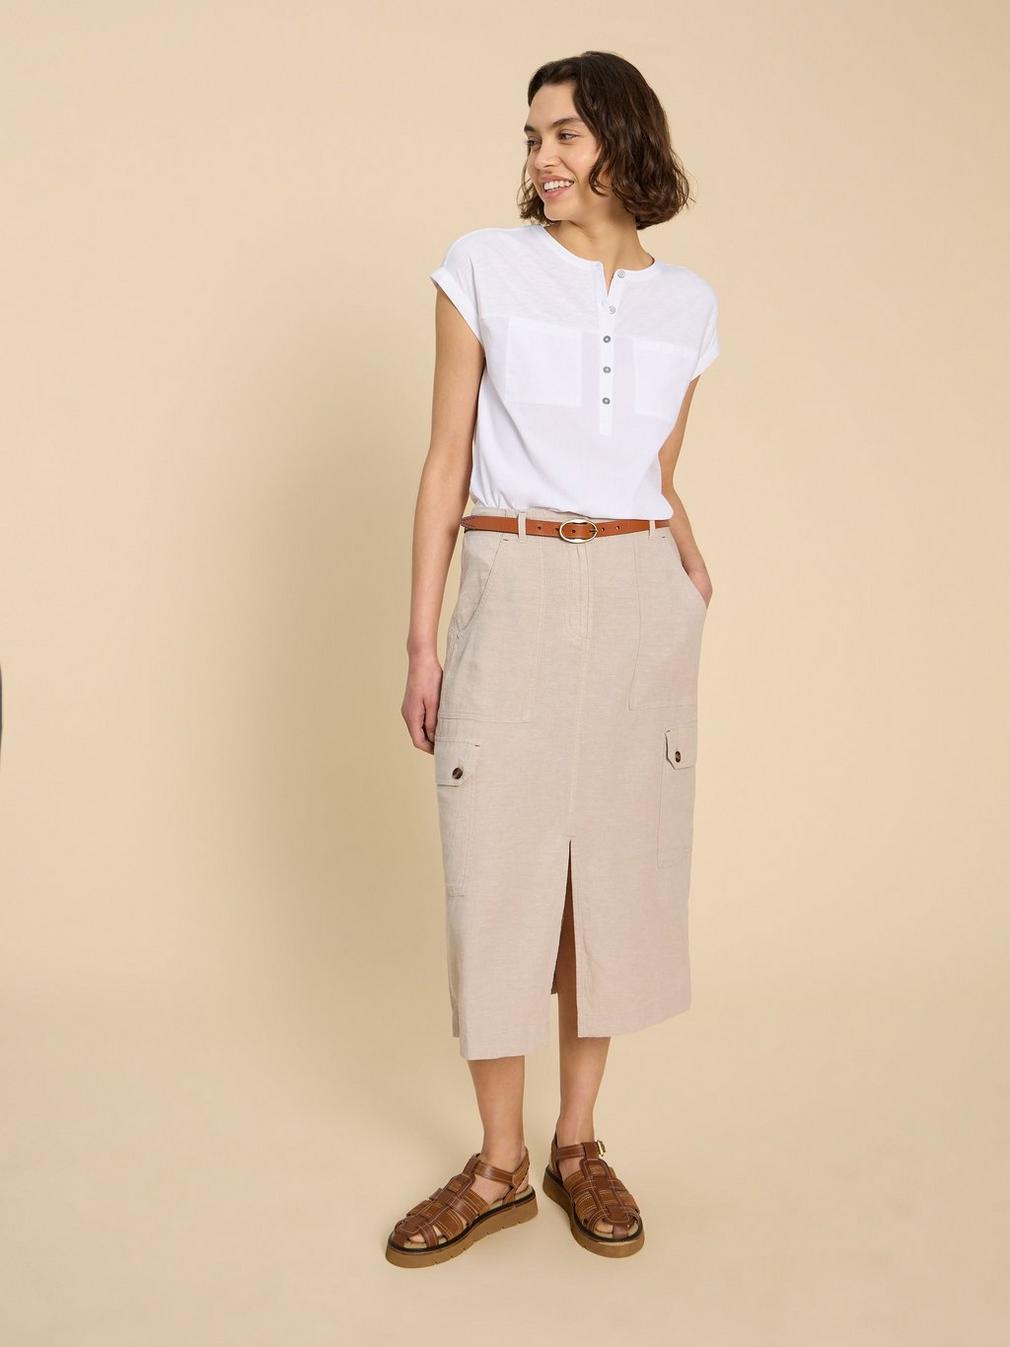 BETH JERSEY SHIRT in BRIL WHITE - MODEL FRONT